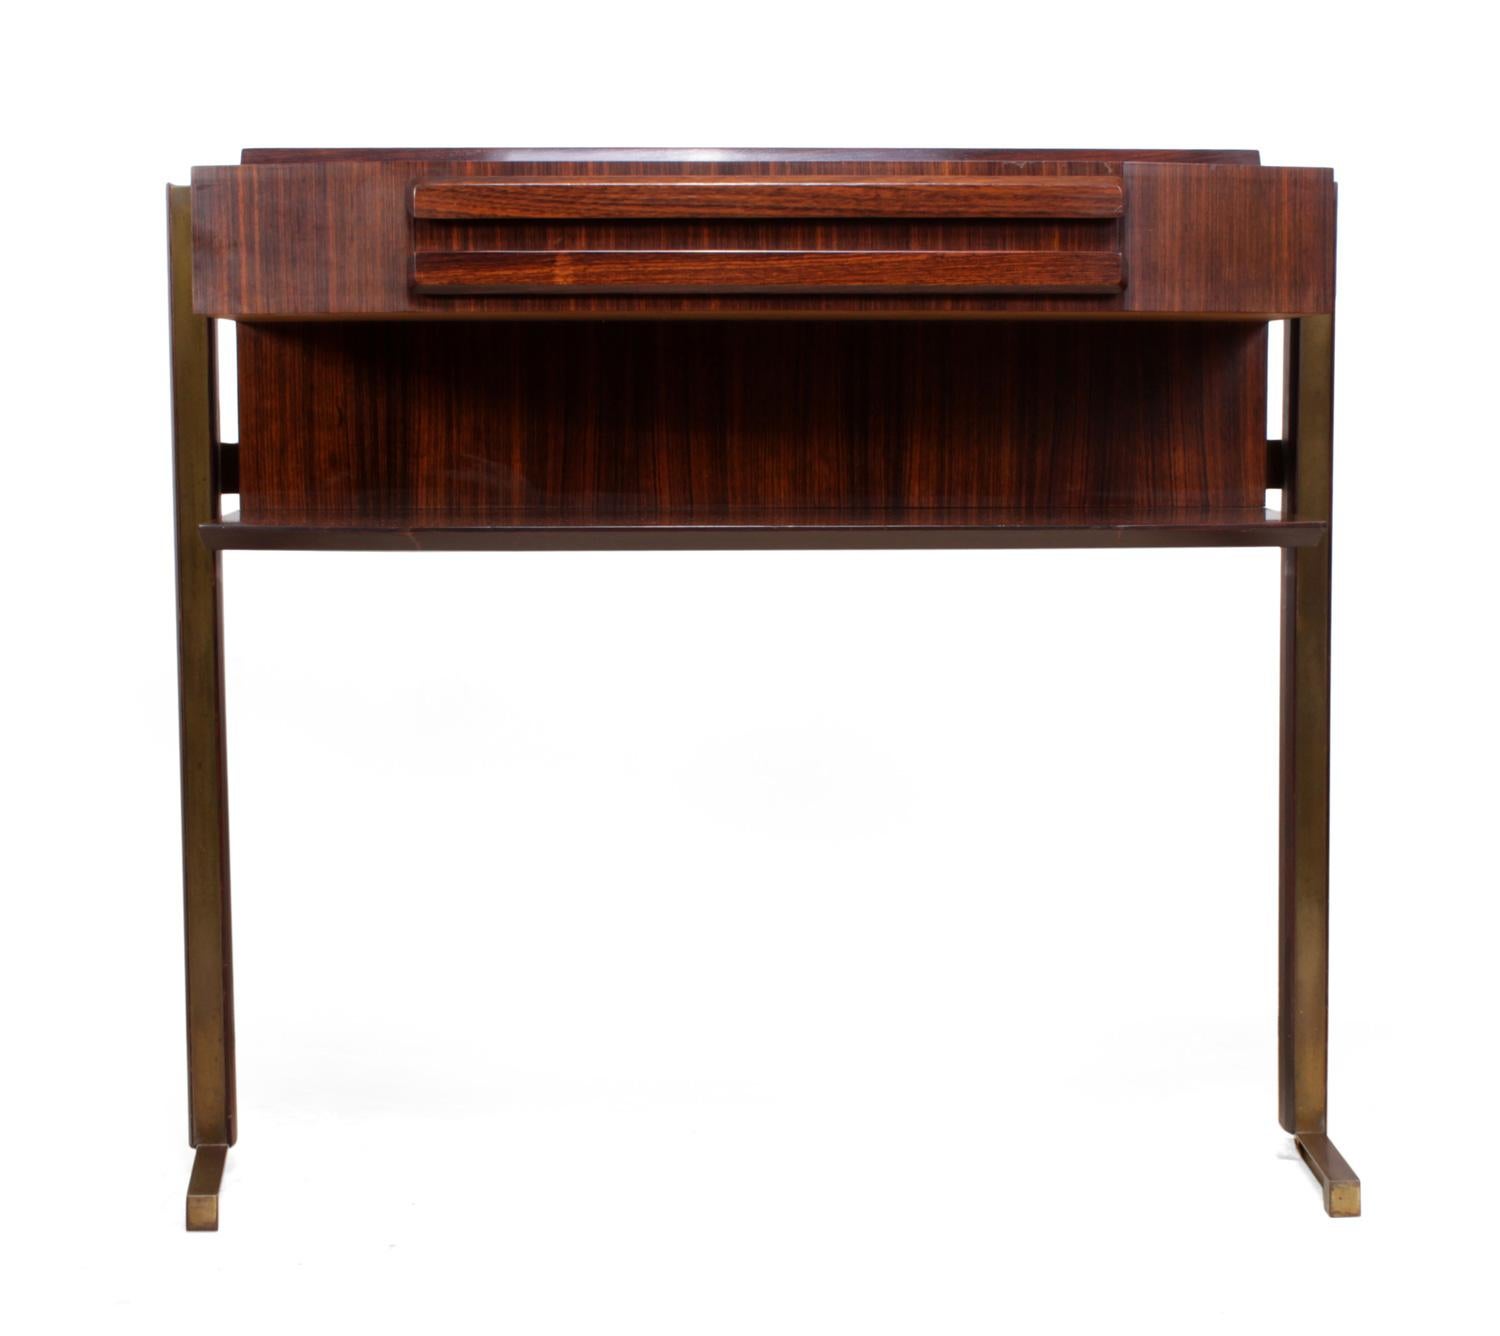 Midcentury Italian console table, circa 1960.
produced in Italy in the 1960s this rosewood and brass console table it has a single central drawer we have cleaned but not polished the brass as we like the patina the top has been polished the overall